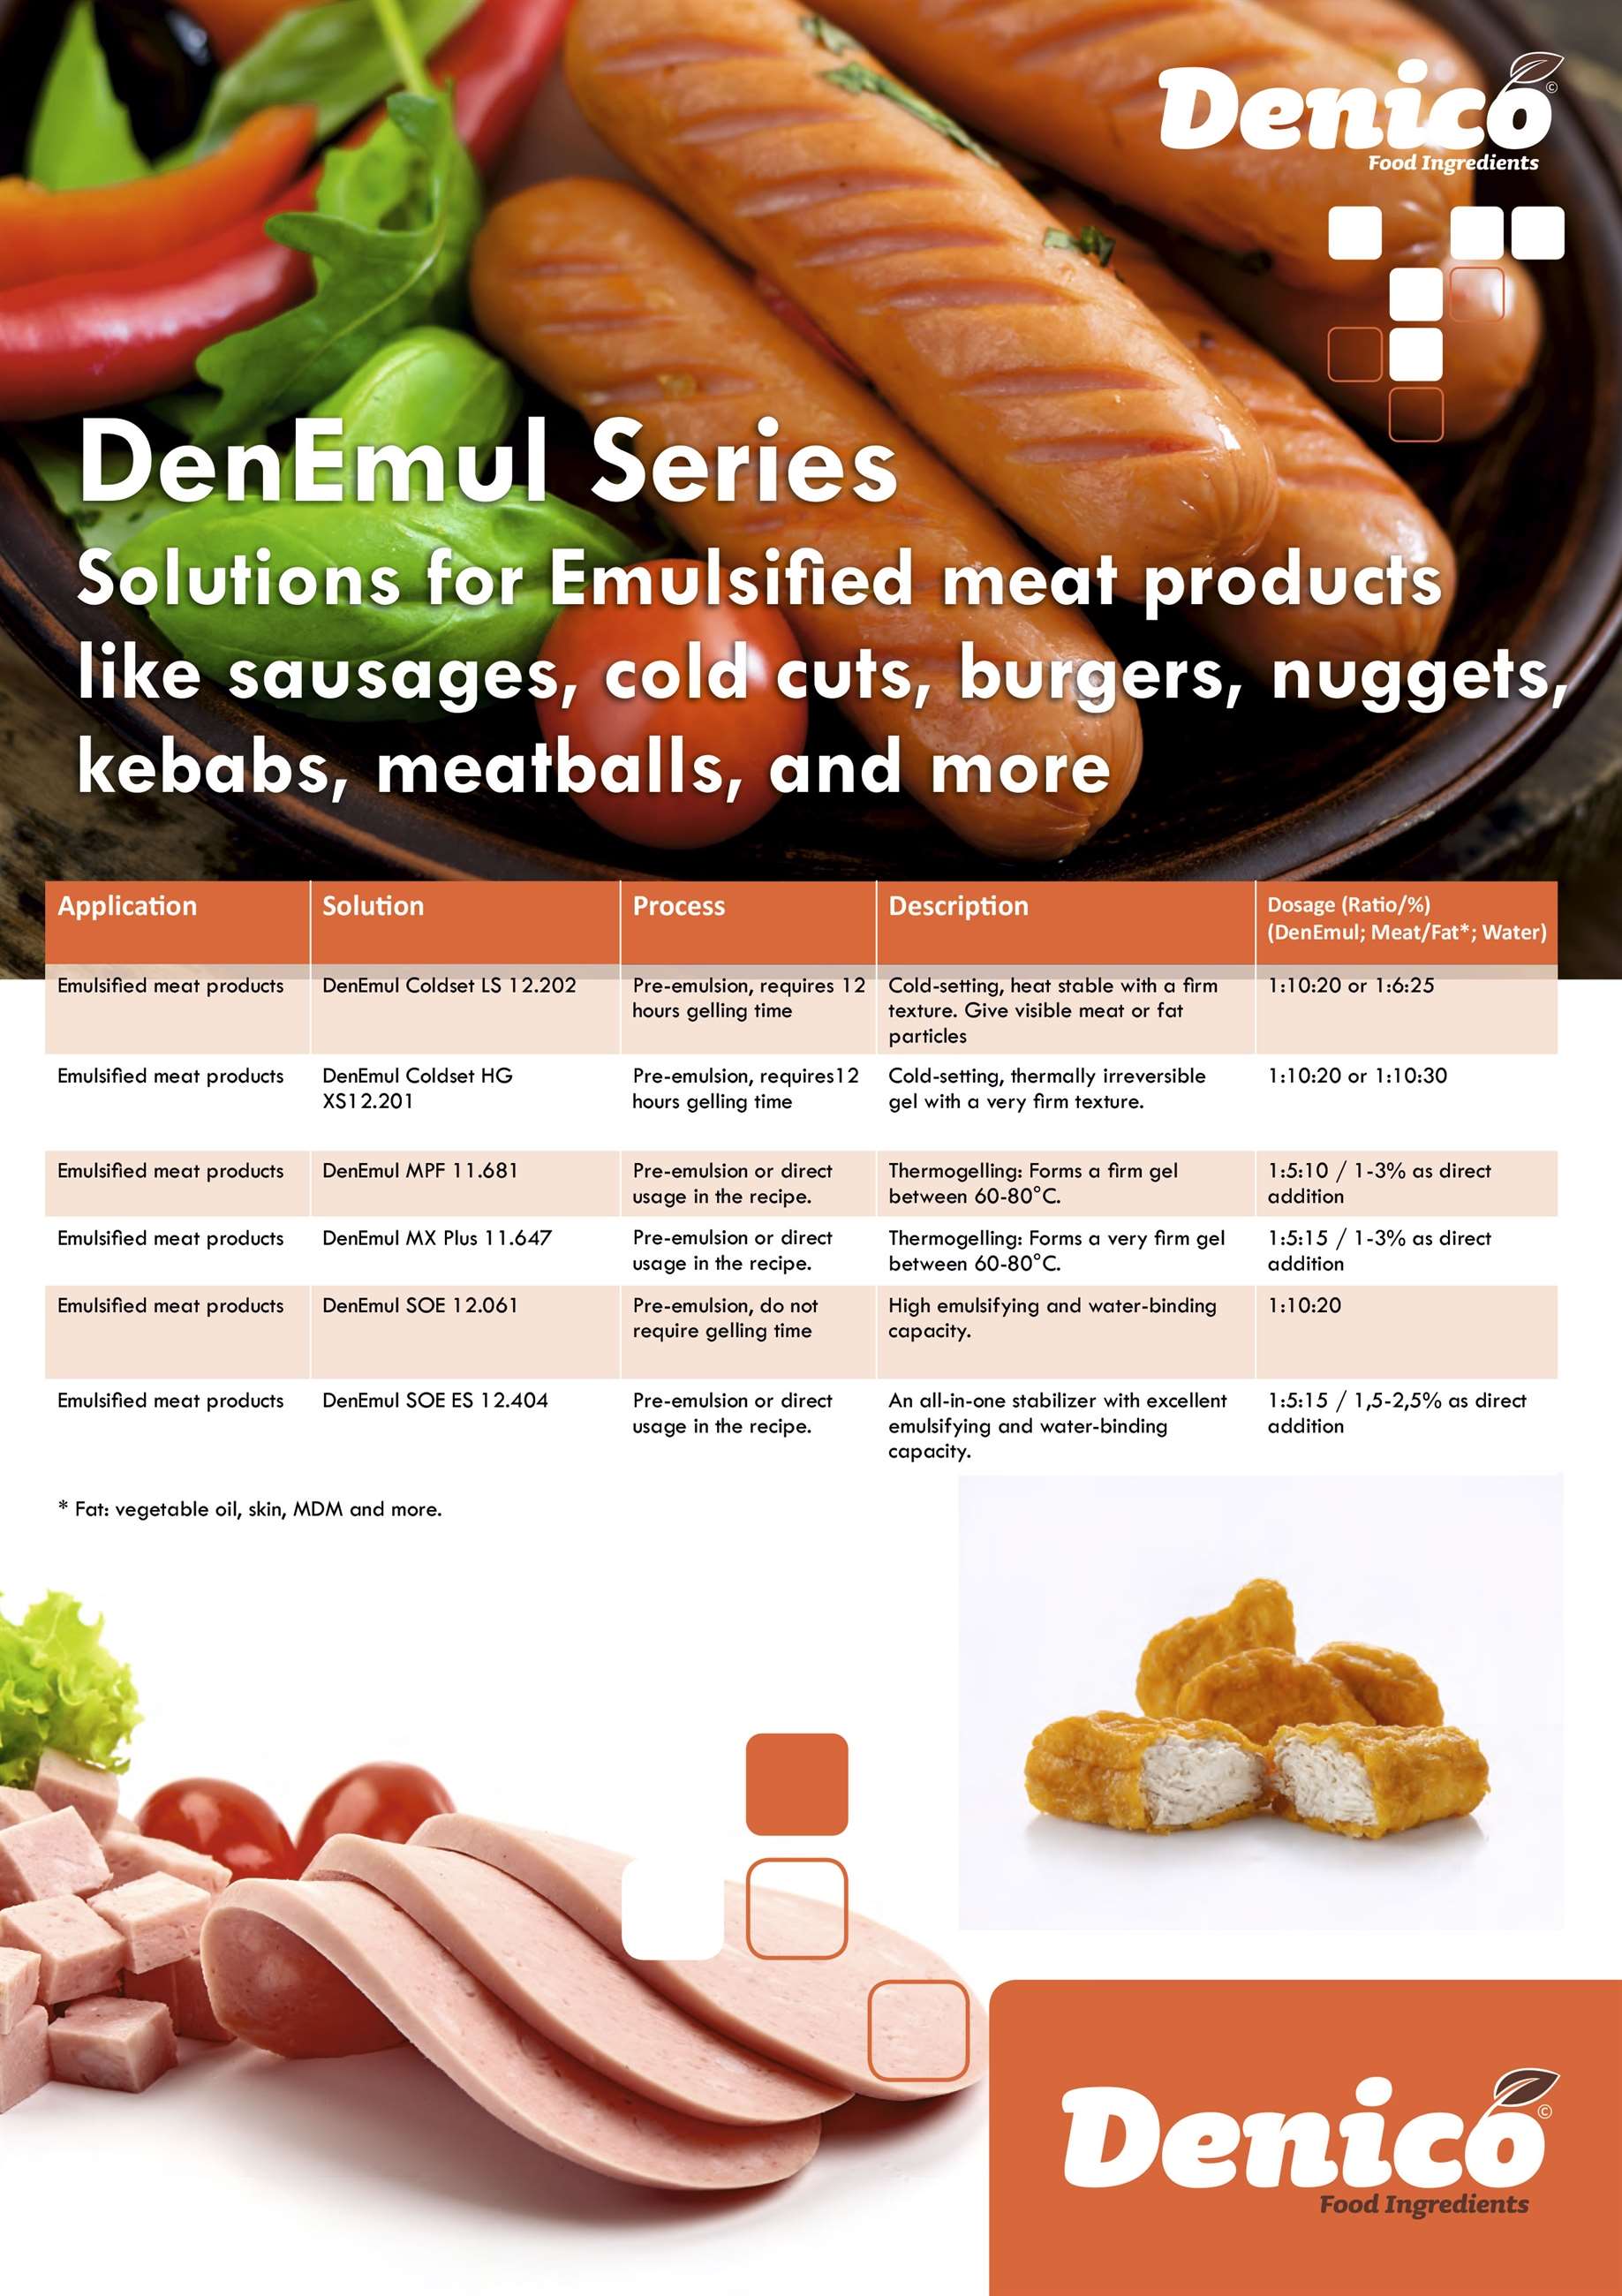 denemul-series---solutions-for-emulsified-meat-products-ver01-1